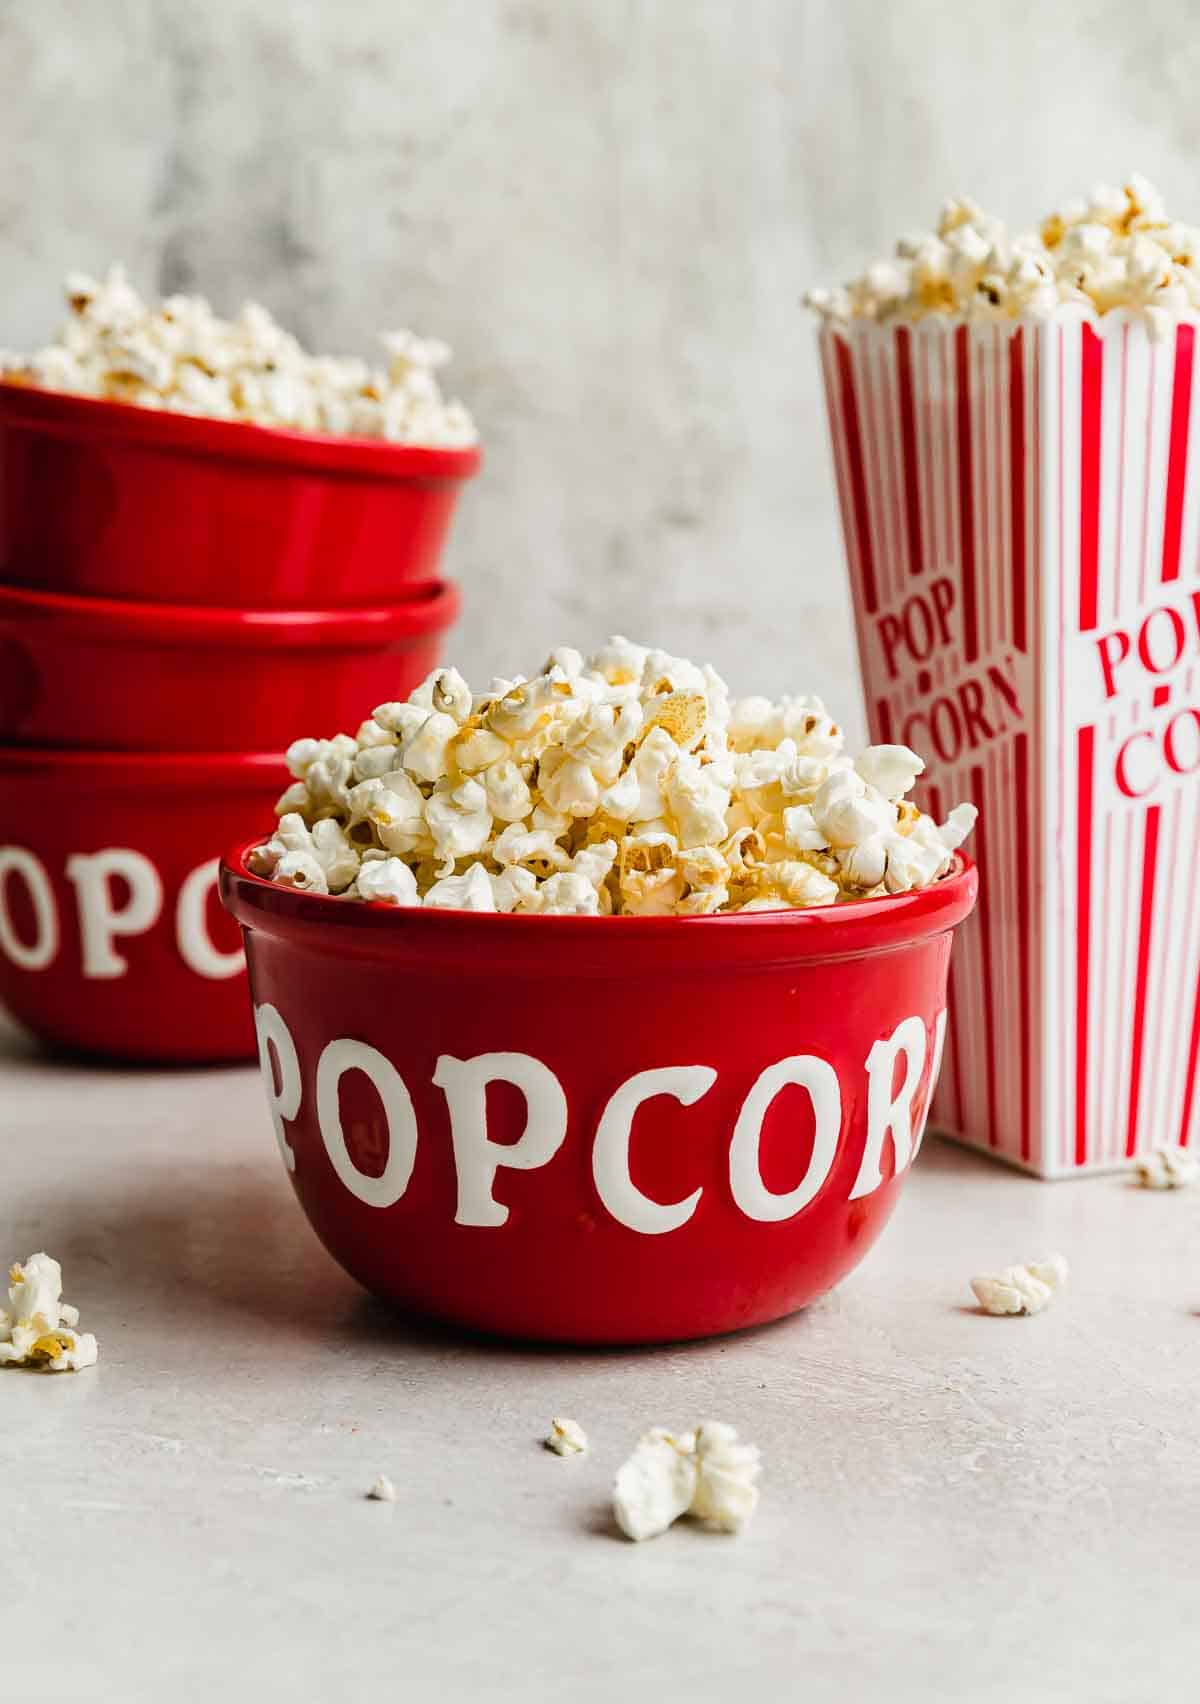 Kettle corn in a red bowl with the words, "popcorn" written in white on the bowl.